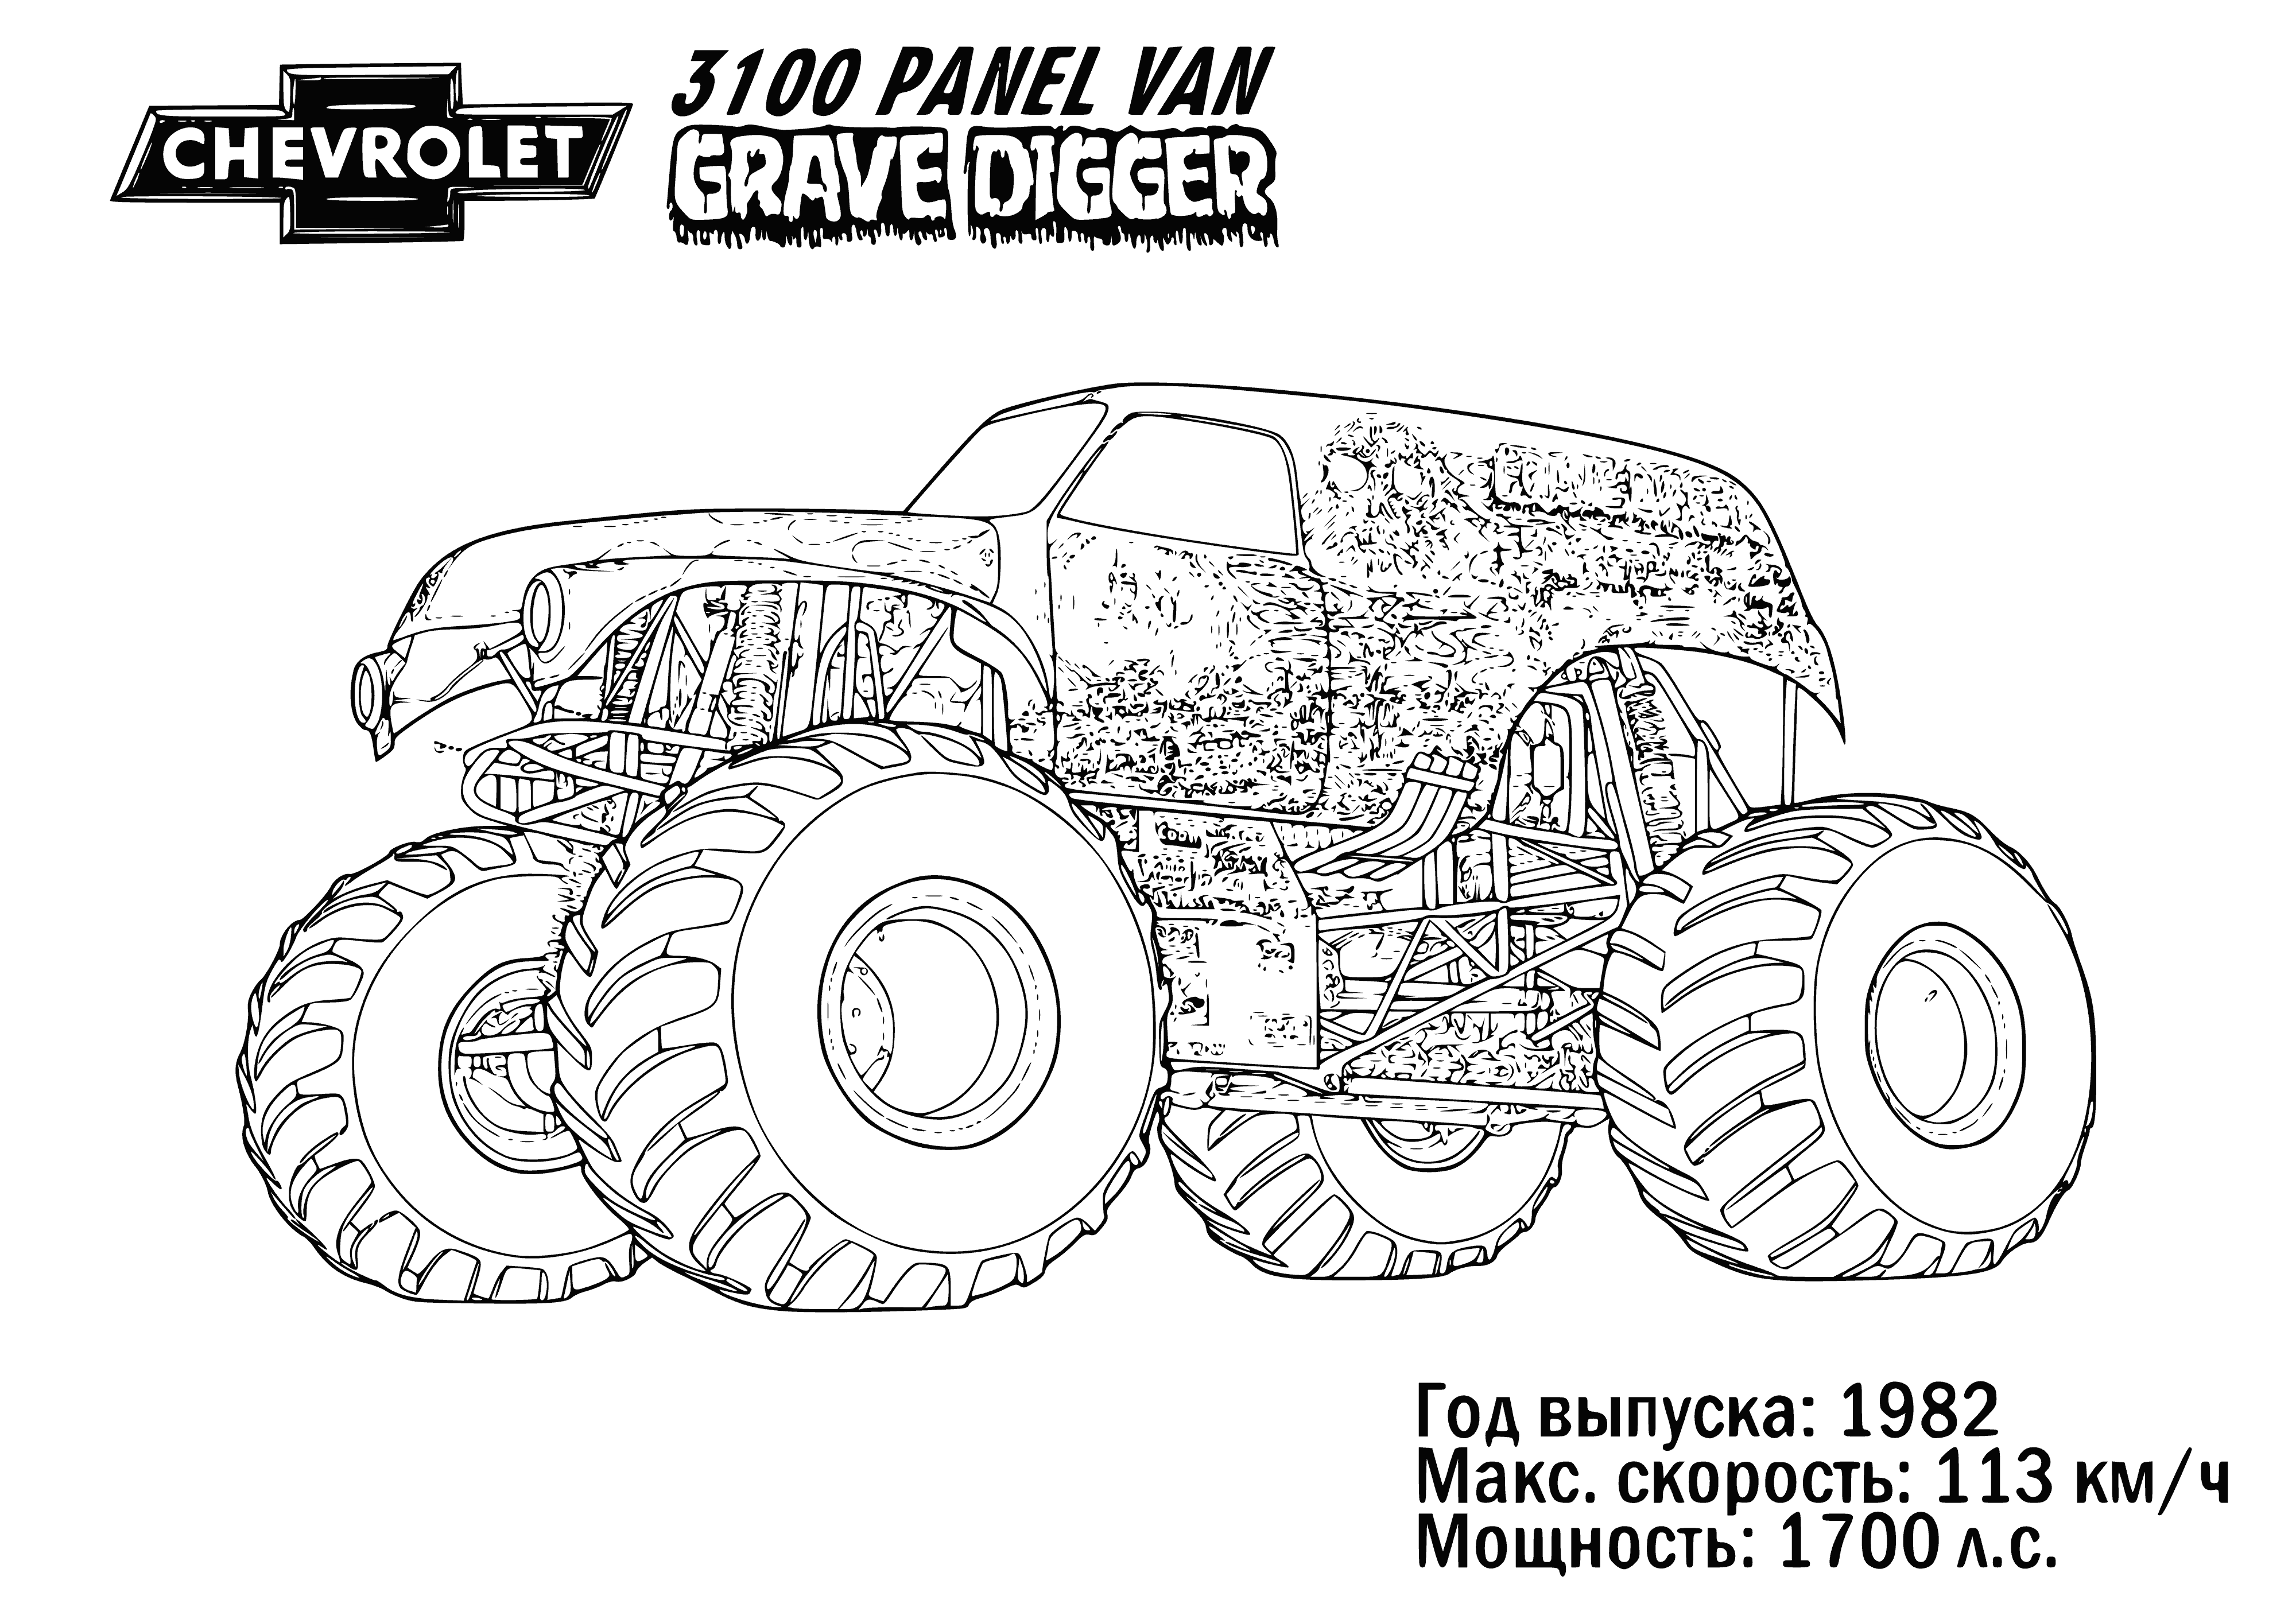 coloring page: Large SUV w/ Chevy logo, dark color w/ white & black accents, large tires, spoiler on back.